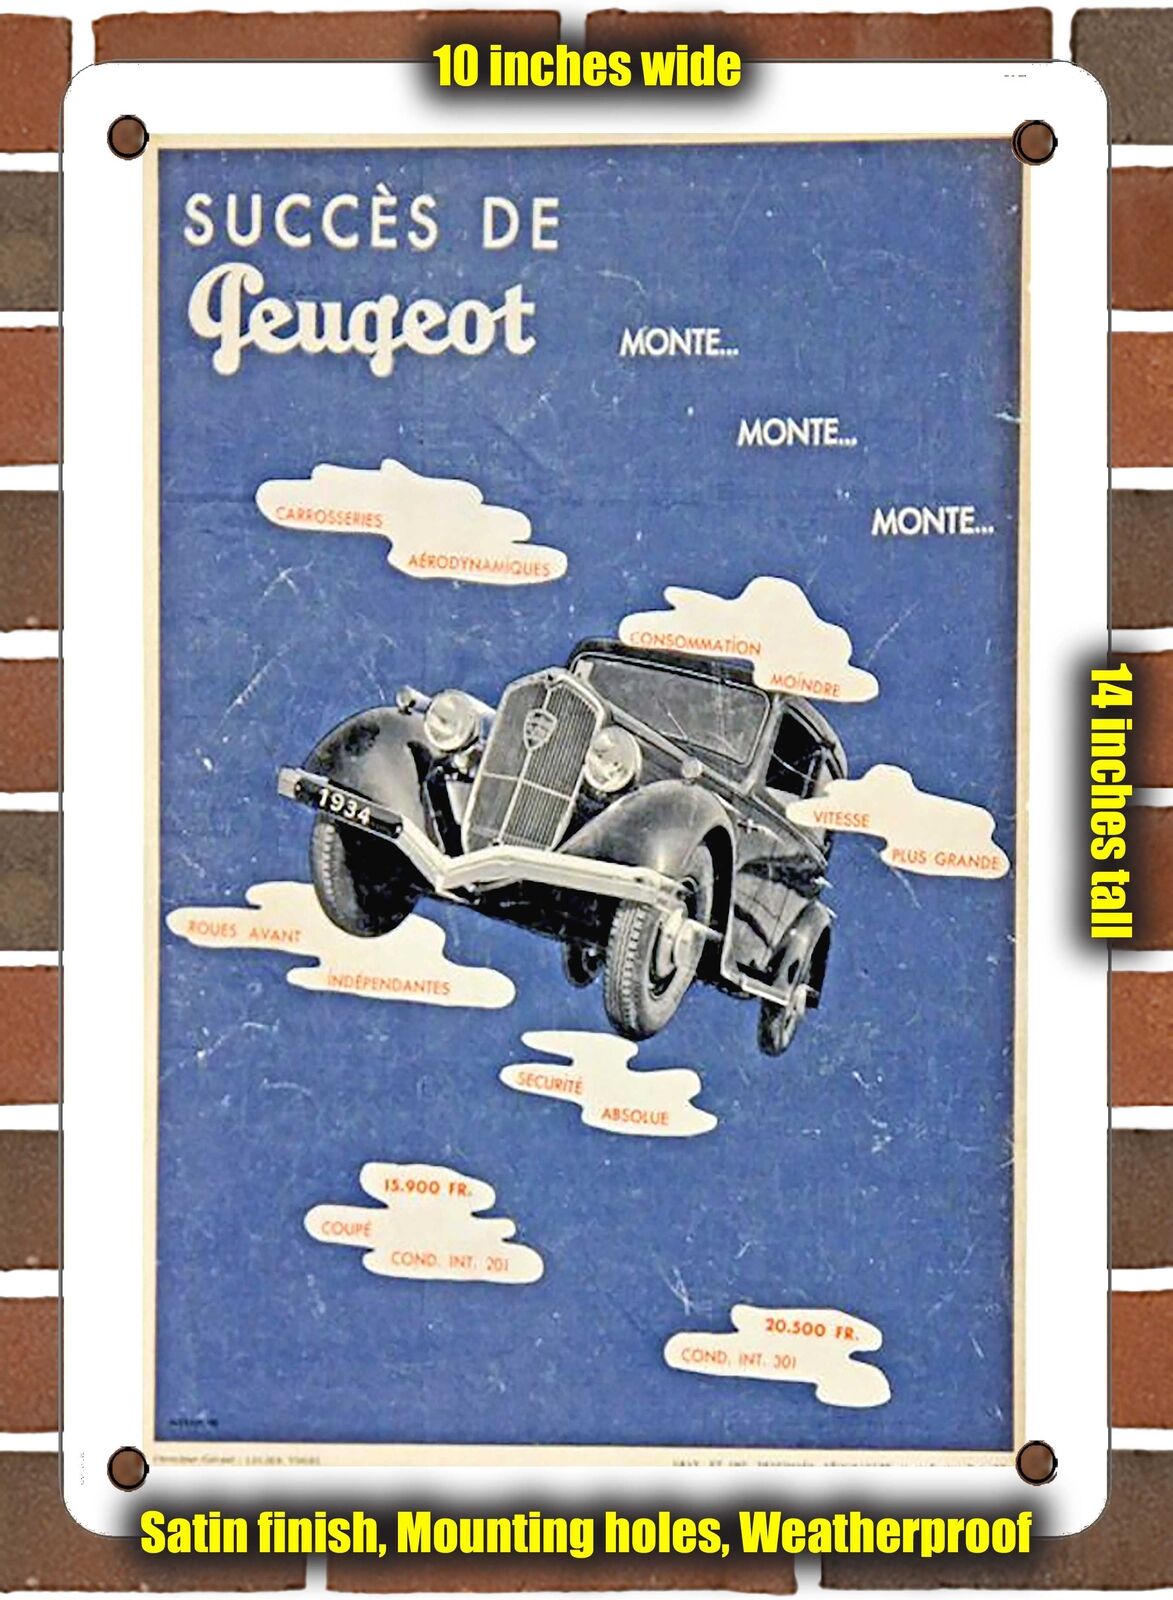 METAL SIGN - 1934 Peugeot 301 Peugeot's Success Goes Up.Up.Up. - 10x14 Inches